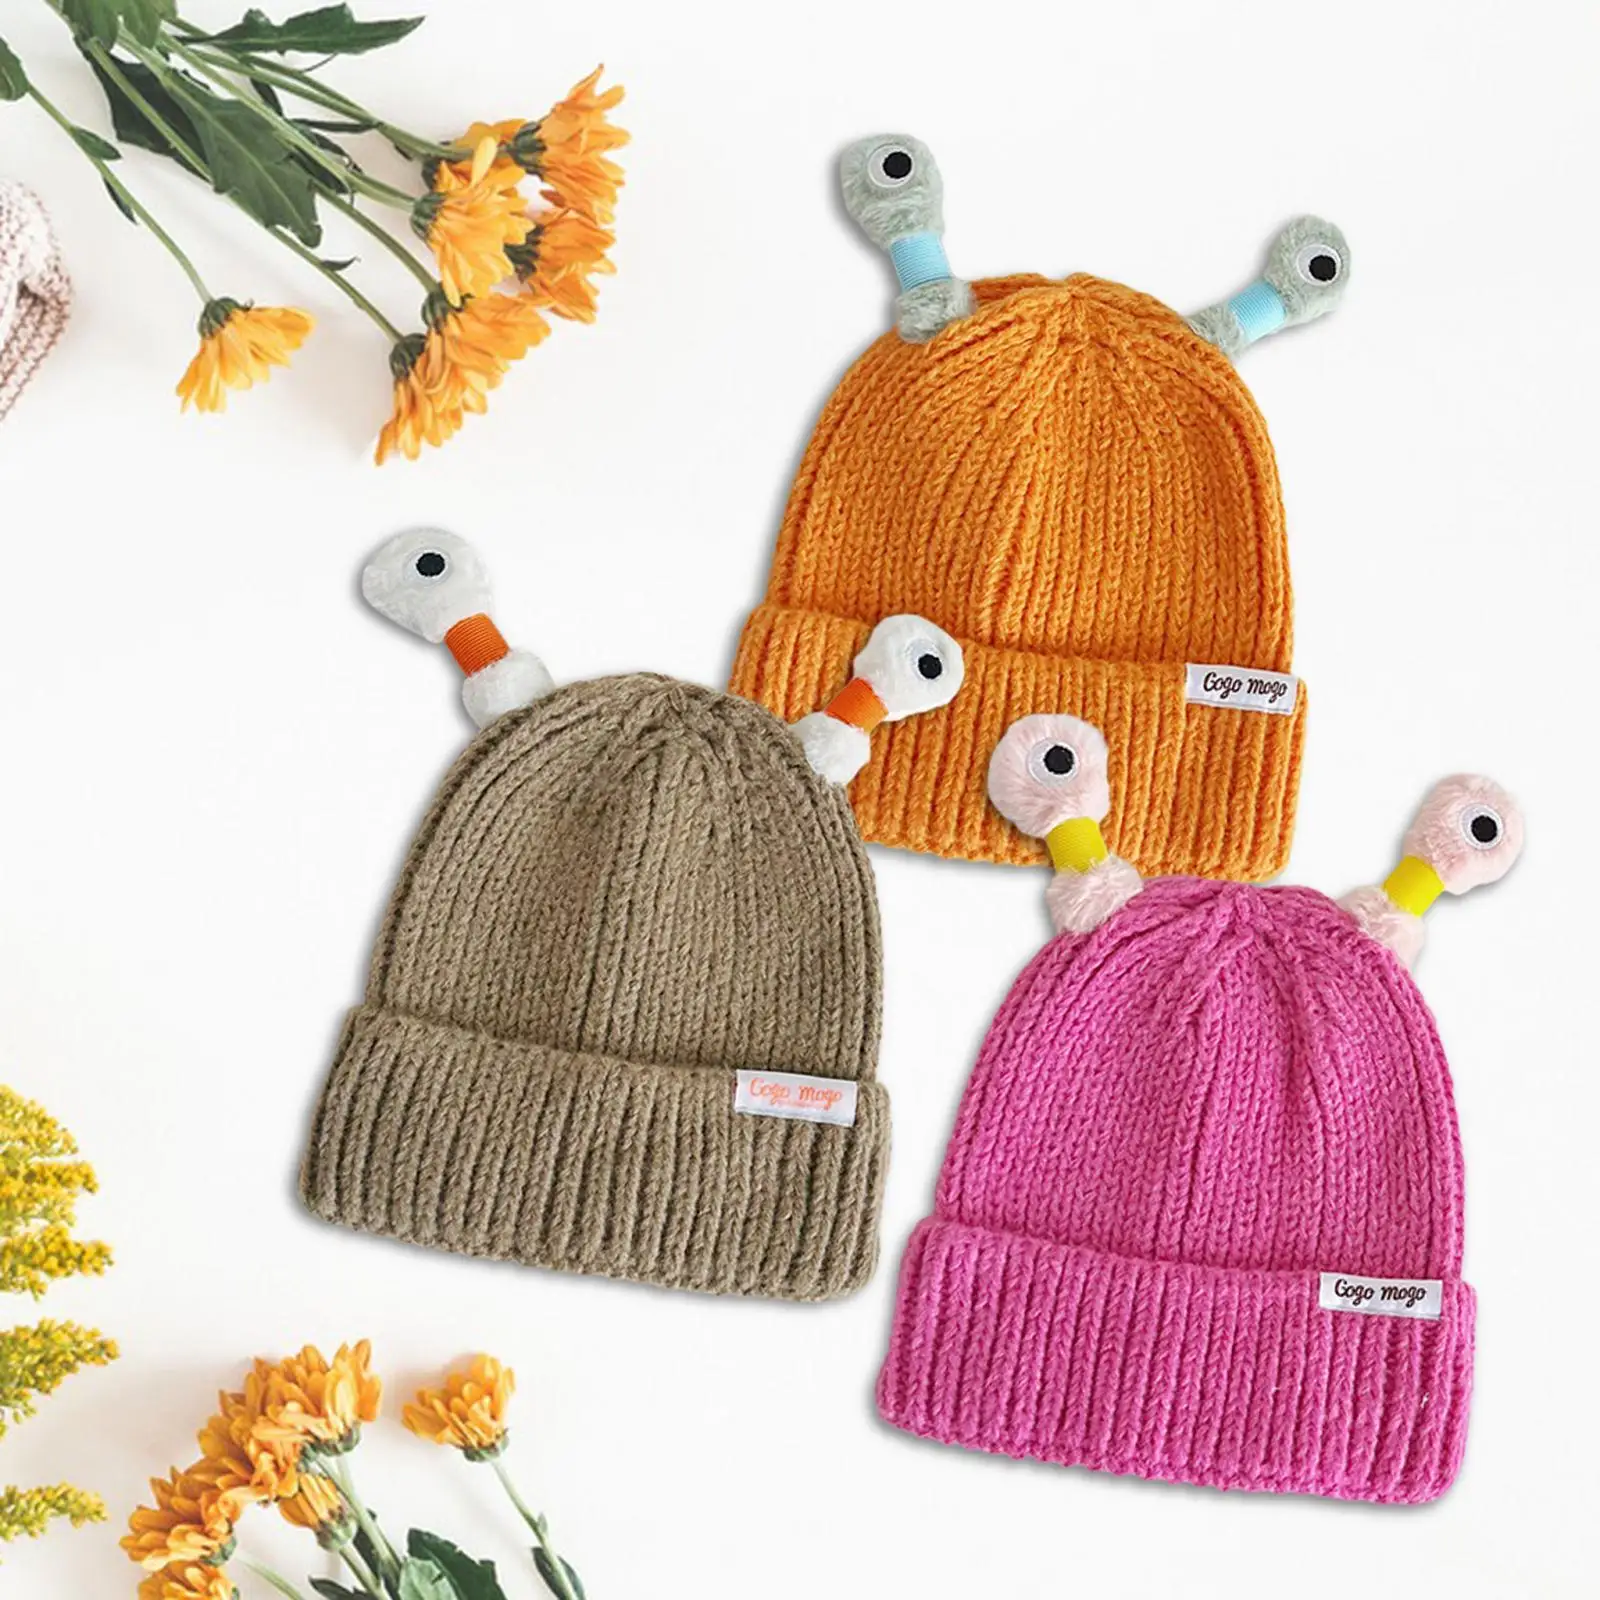 Little Monster Knit Hat Adults Children Durable Cute Portable Winter Hat Knitted Hat for Costume Props Camping Skating Street